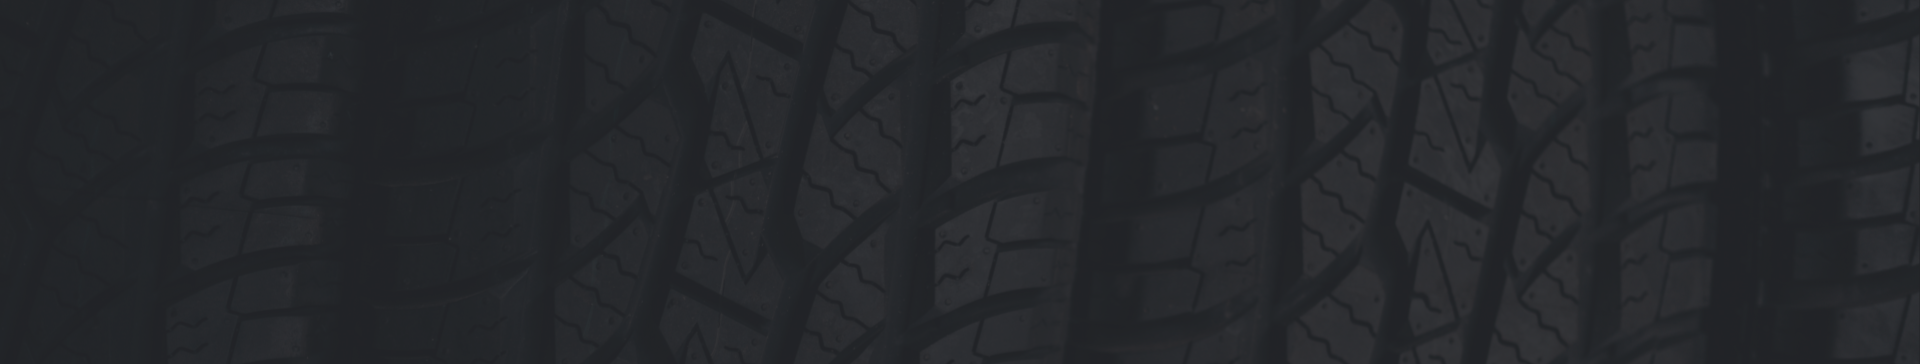 tire background